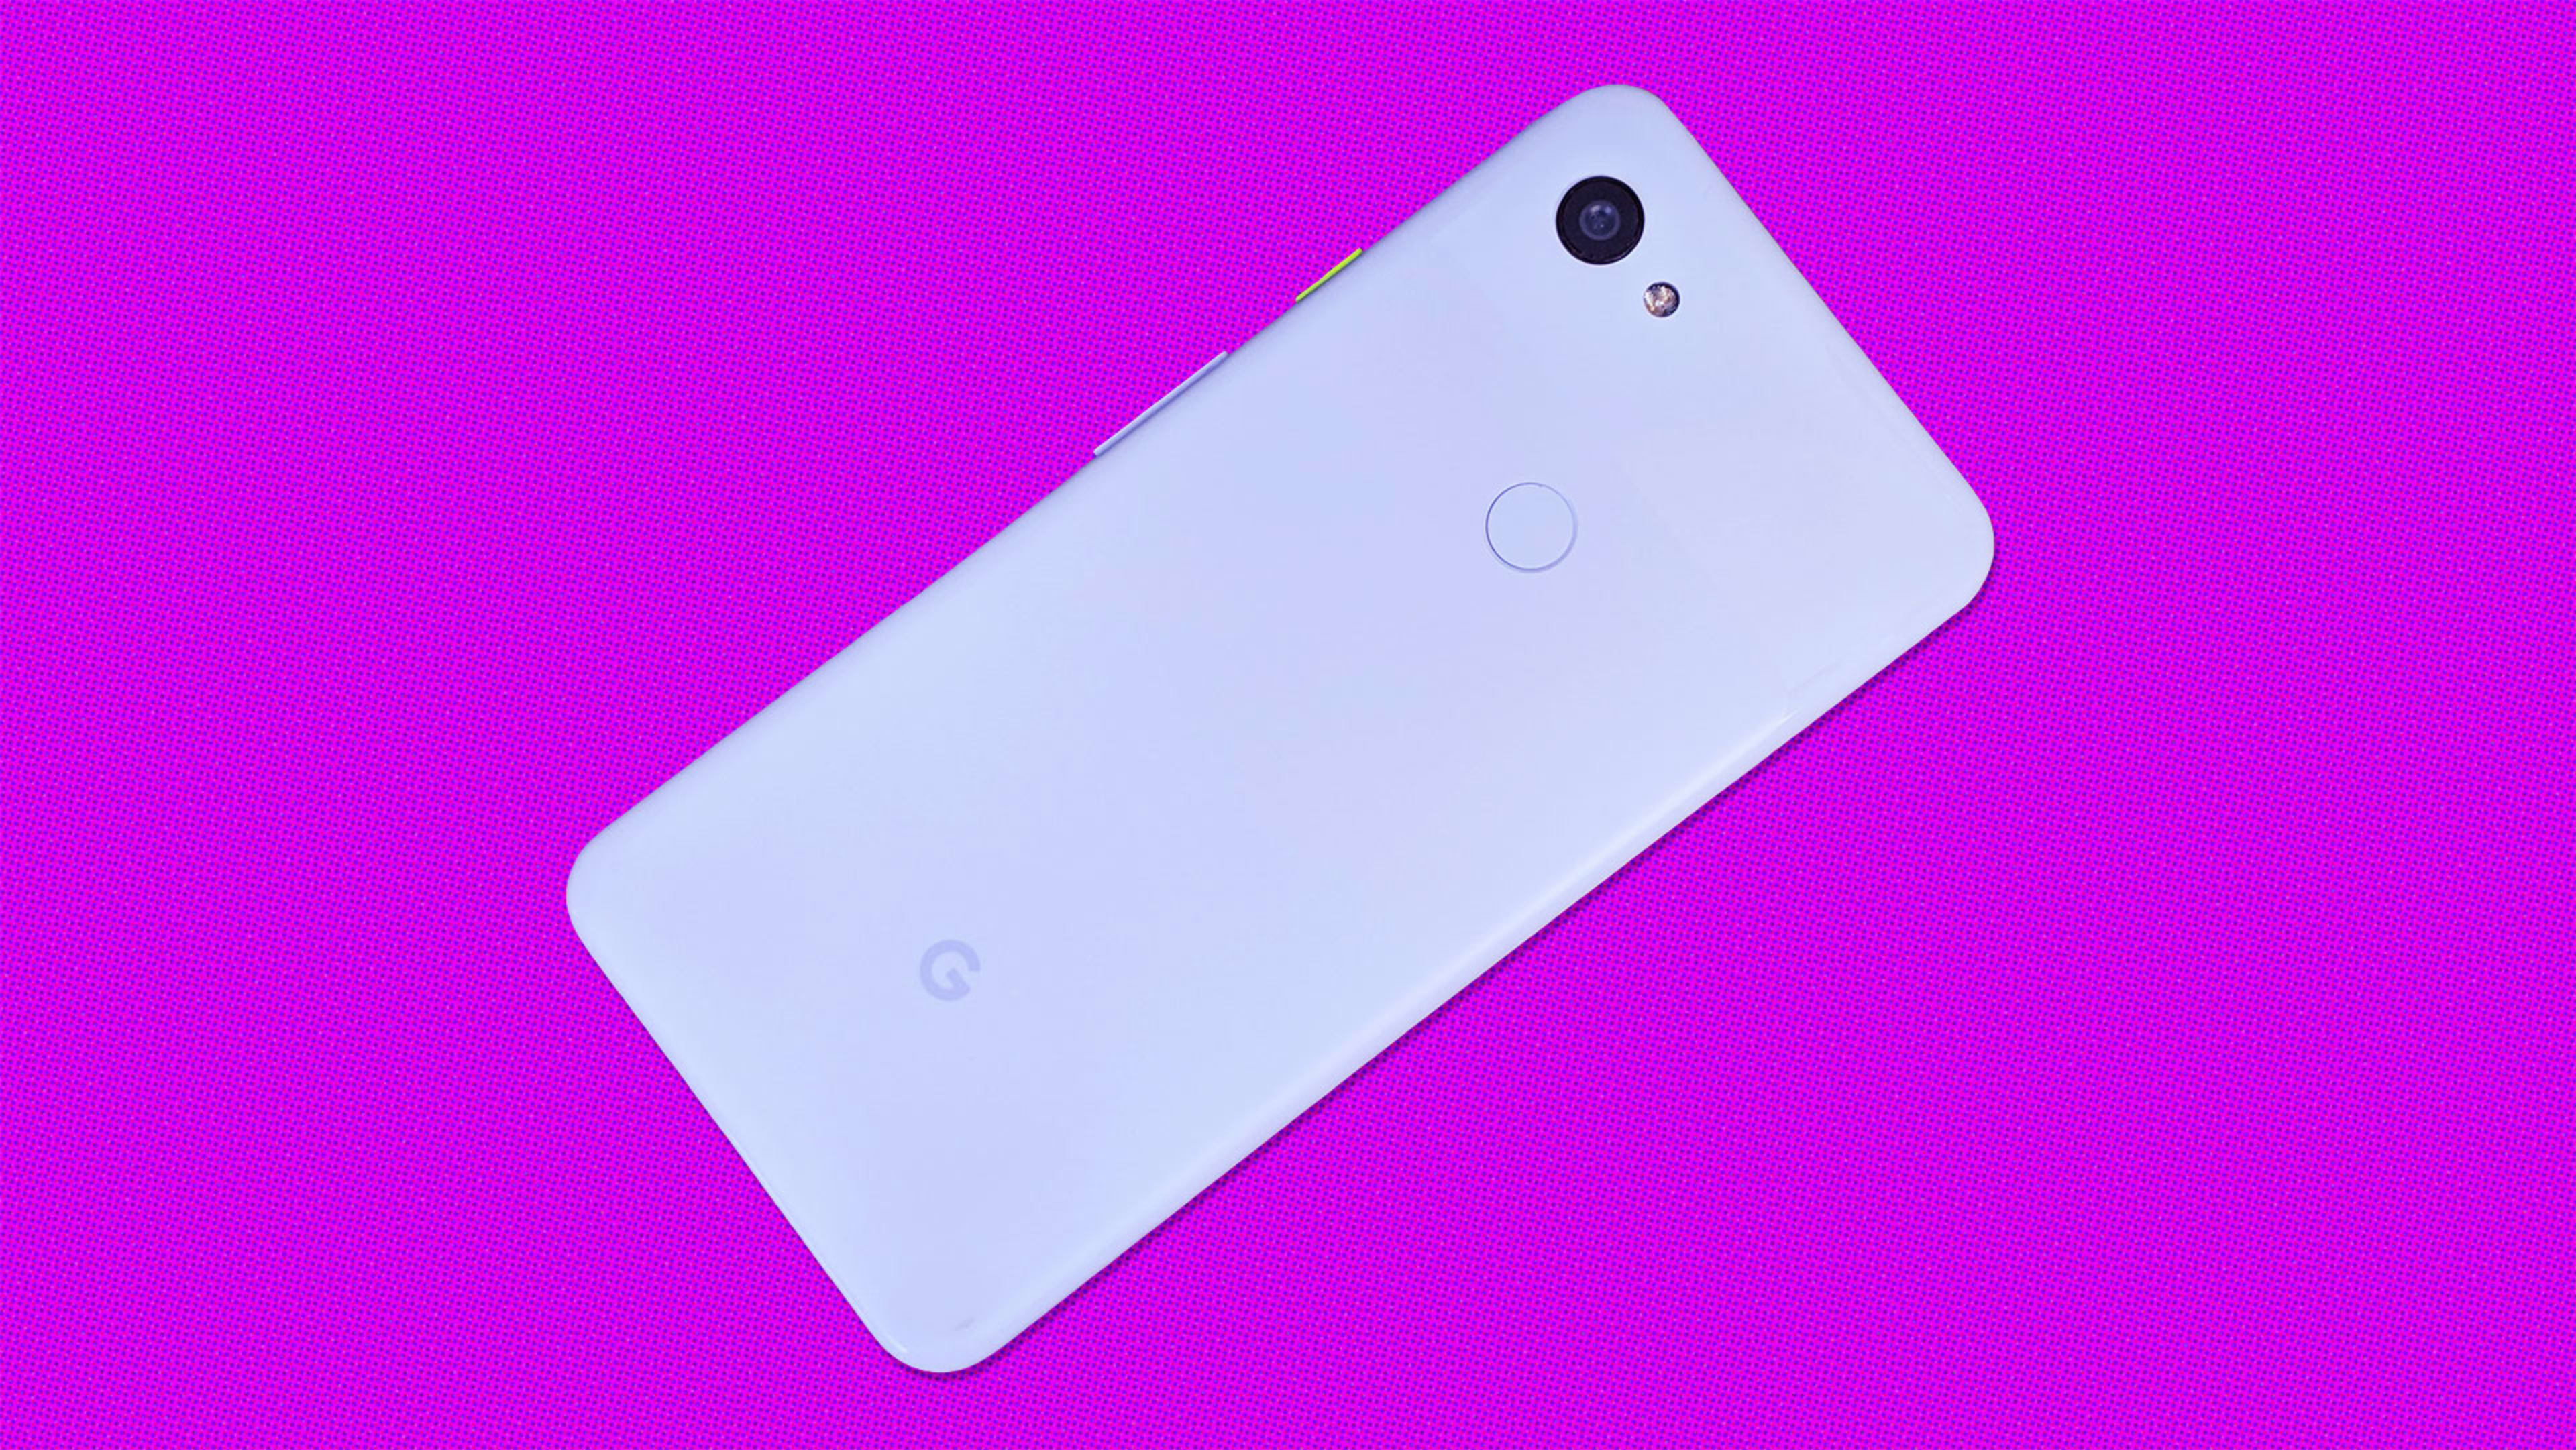 This is a love letter to Google’s Purple-ish Pixel 3A smartphone